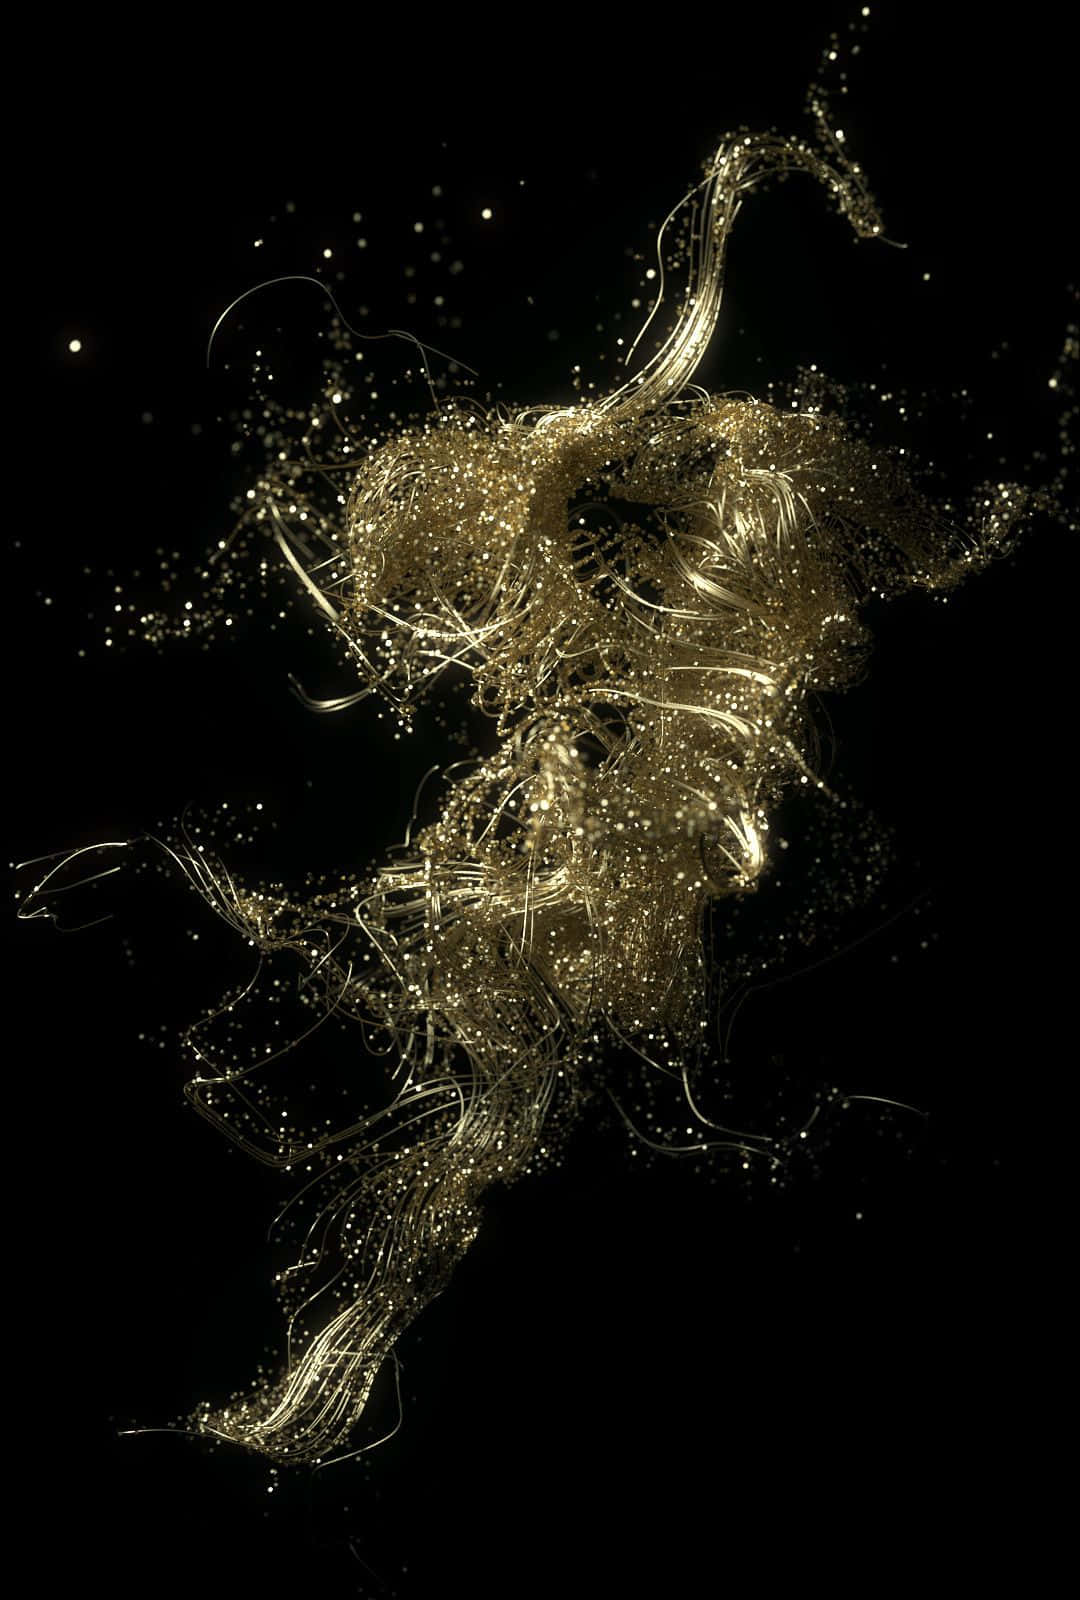 Wispy Black And Gold Aesthetic Wallpaper